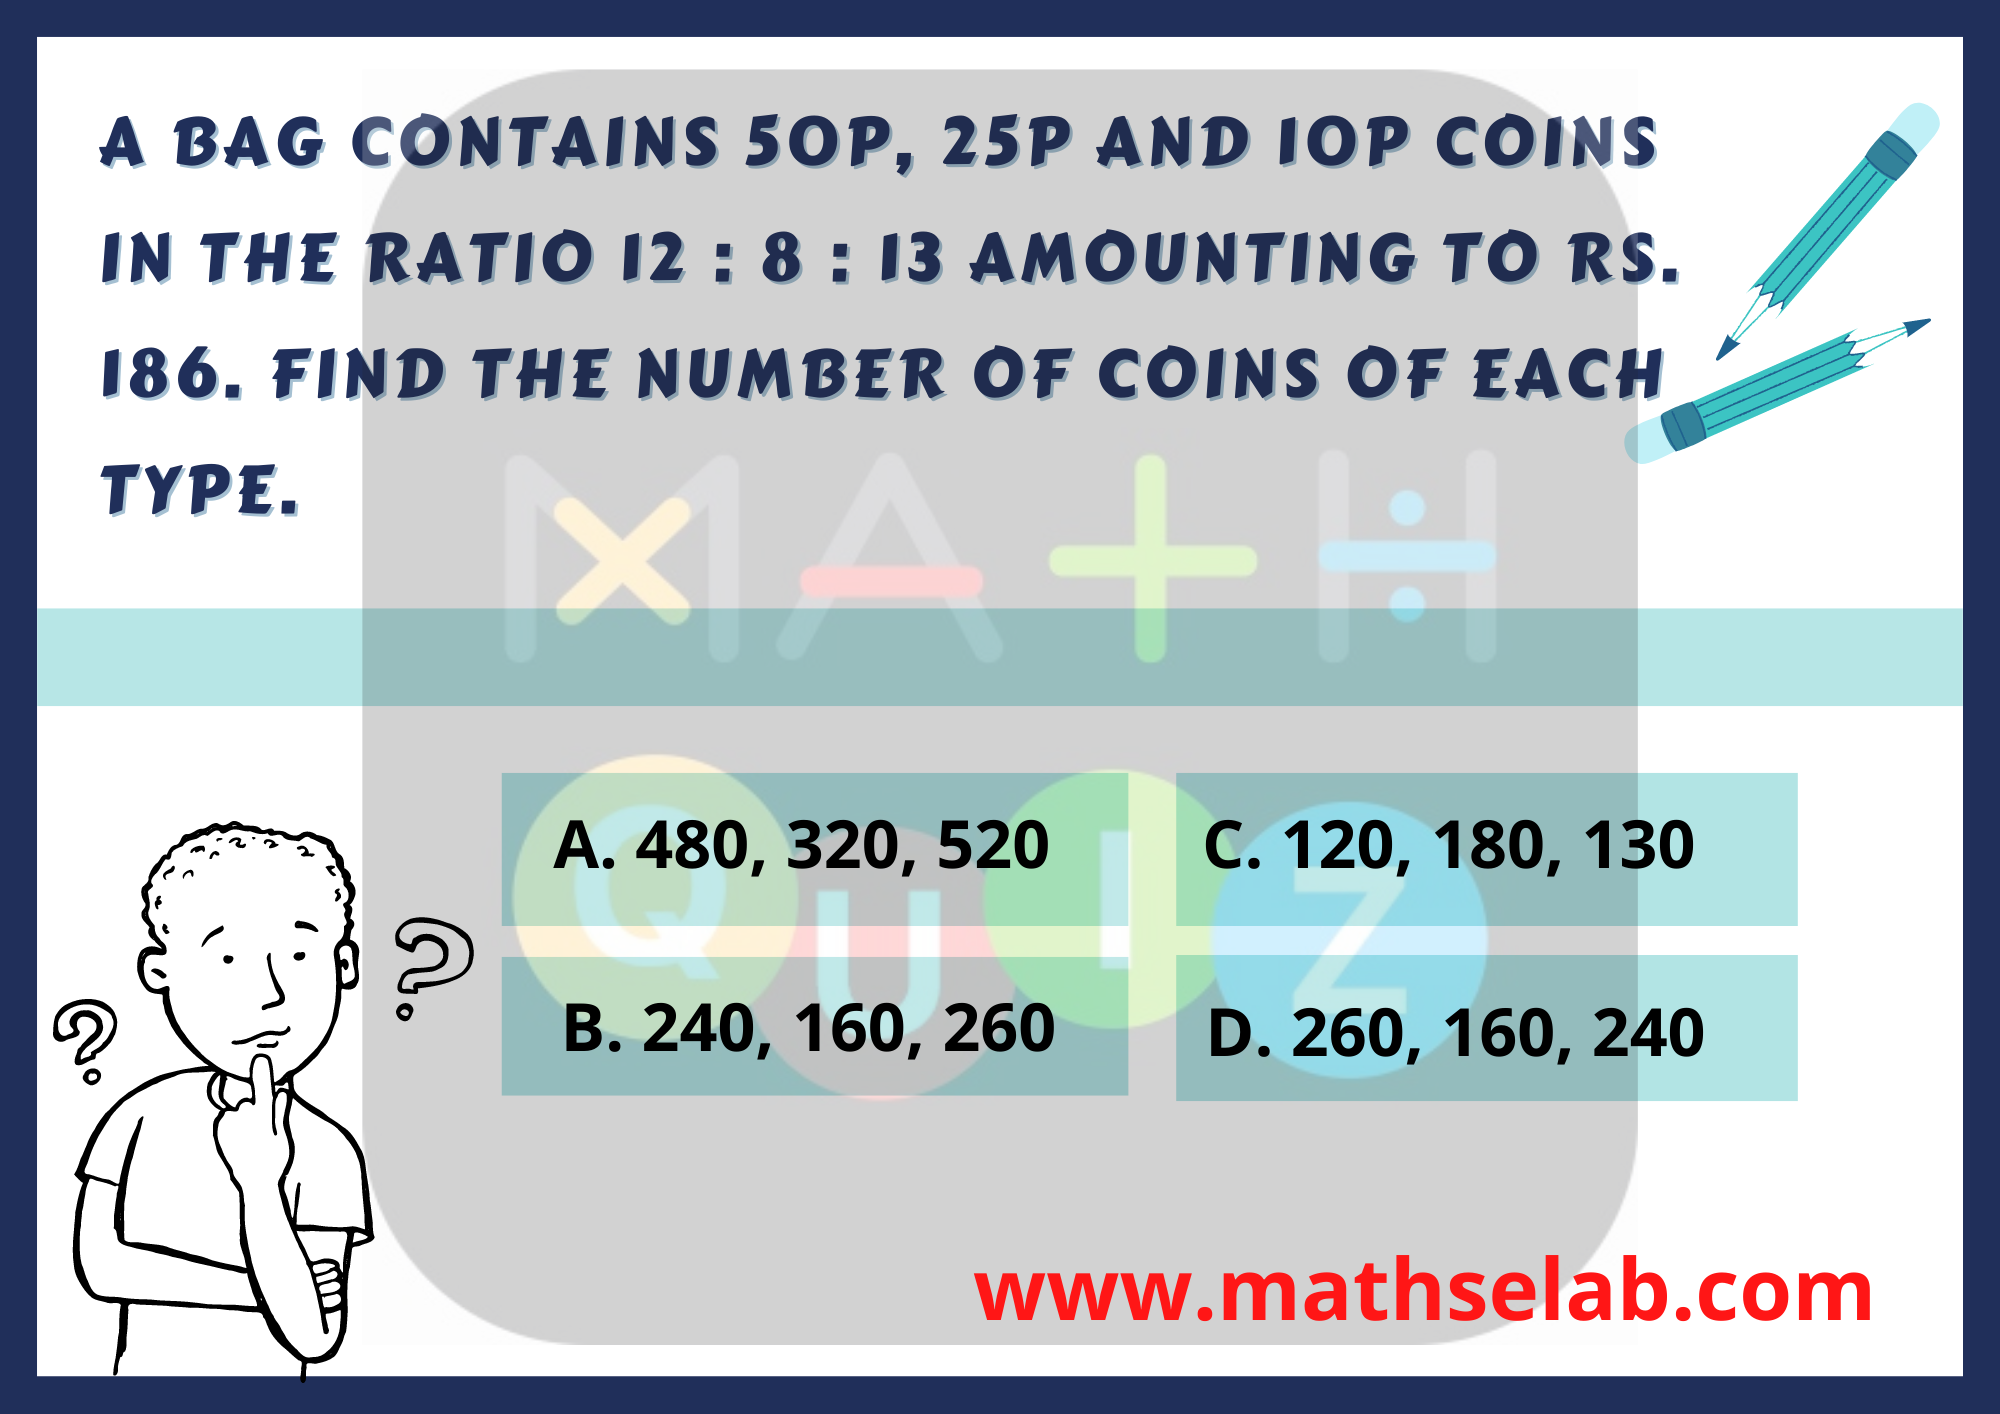 A bag contains 50p, 25p and 10p coins in the ratio 12 : 8 : 13 amounting to Rs. 186. Find the number of coins of each type.